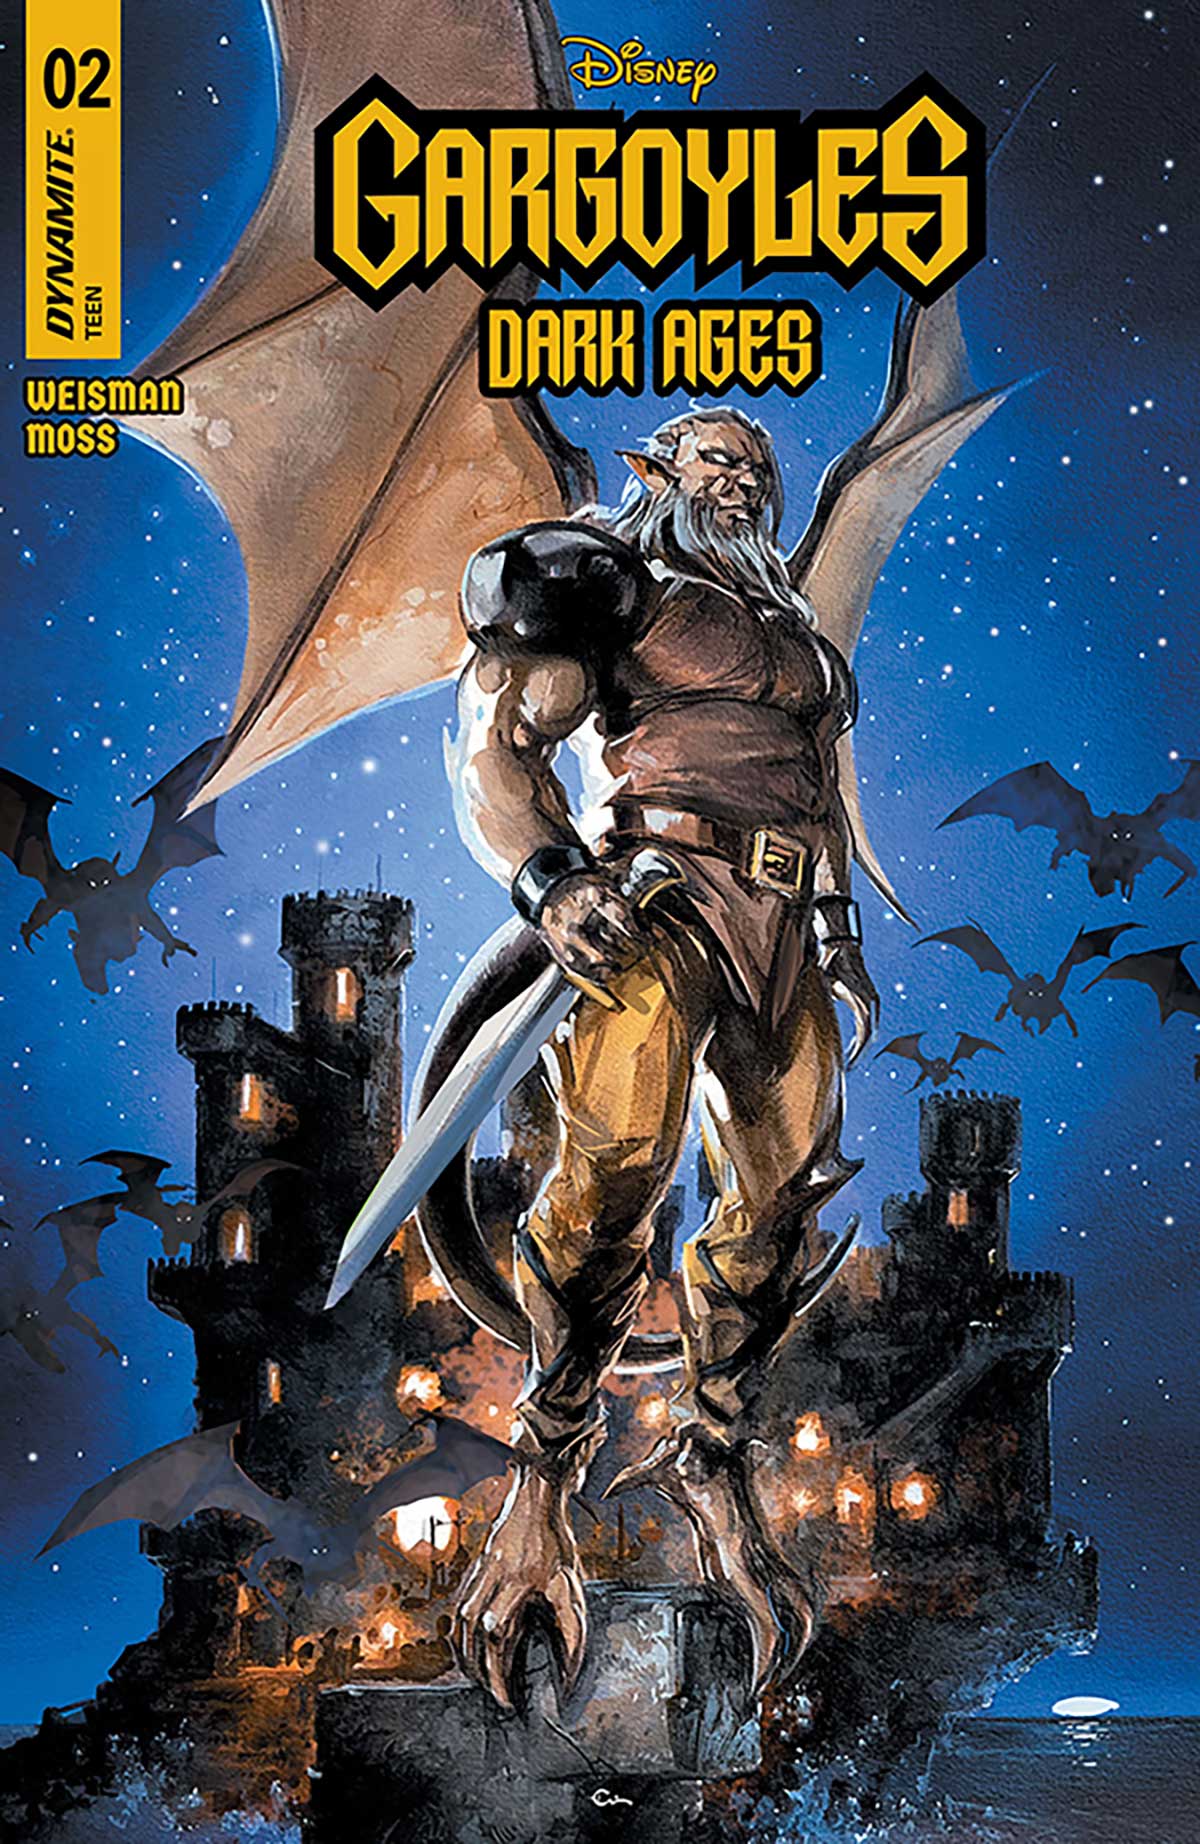 Age of Darkness #1: Comic Book Review